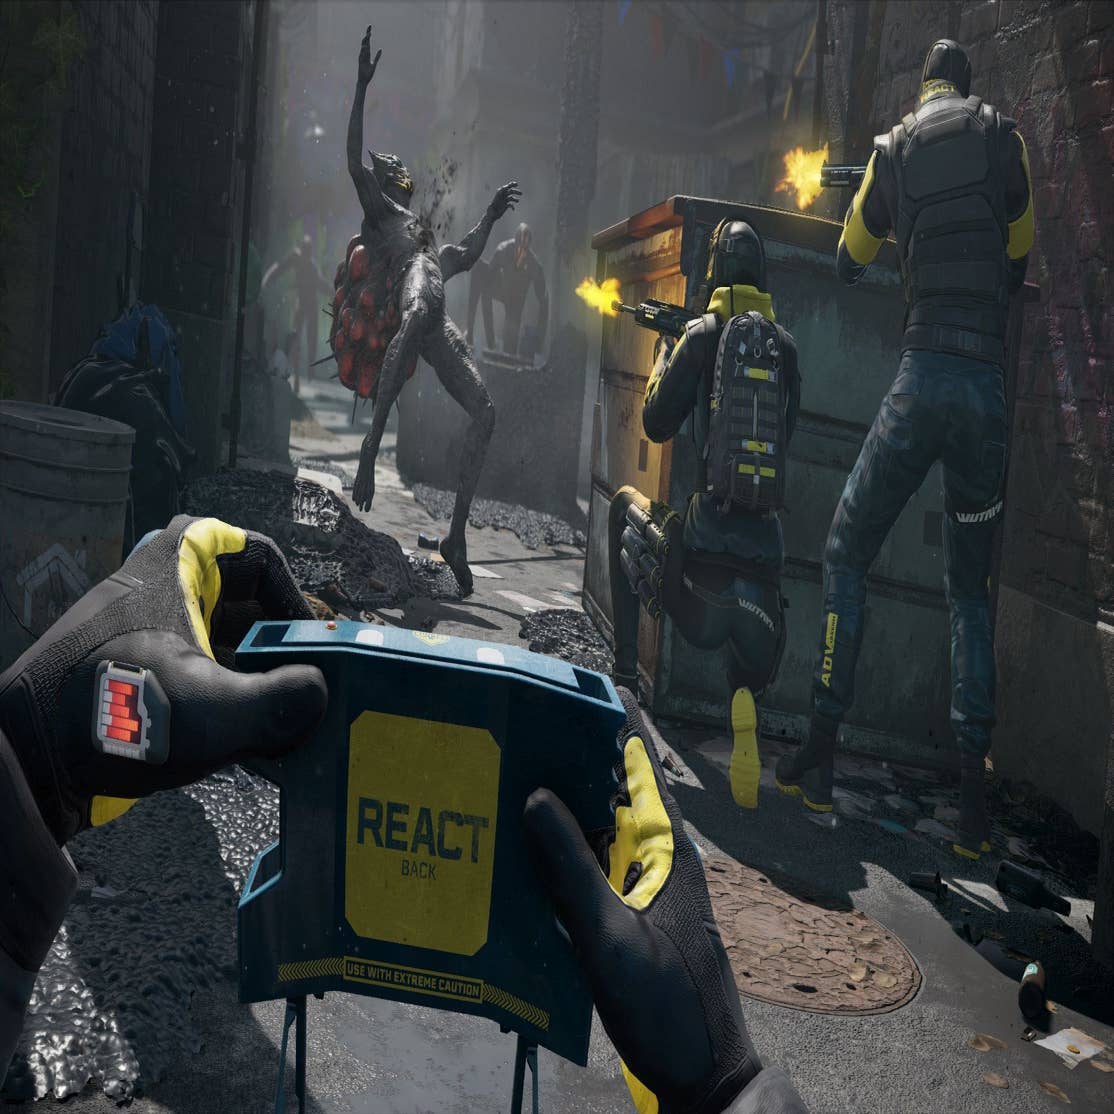 Rainbow Six VG247 release | Extraction for slated January